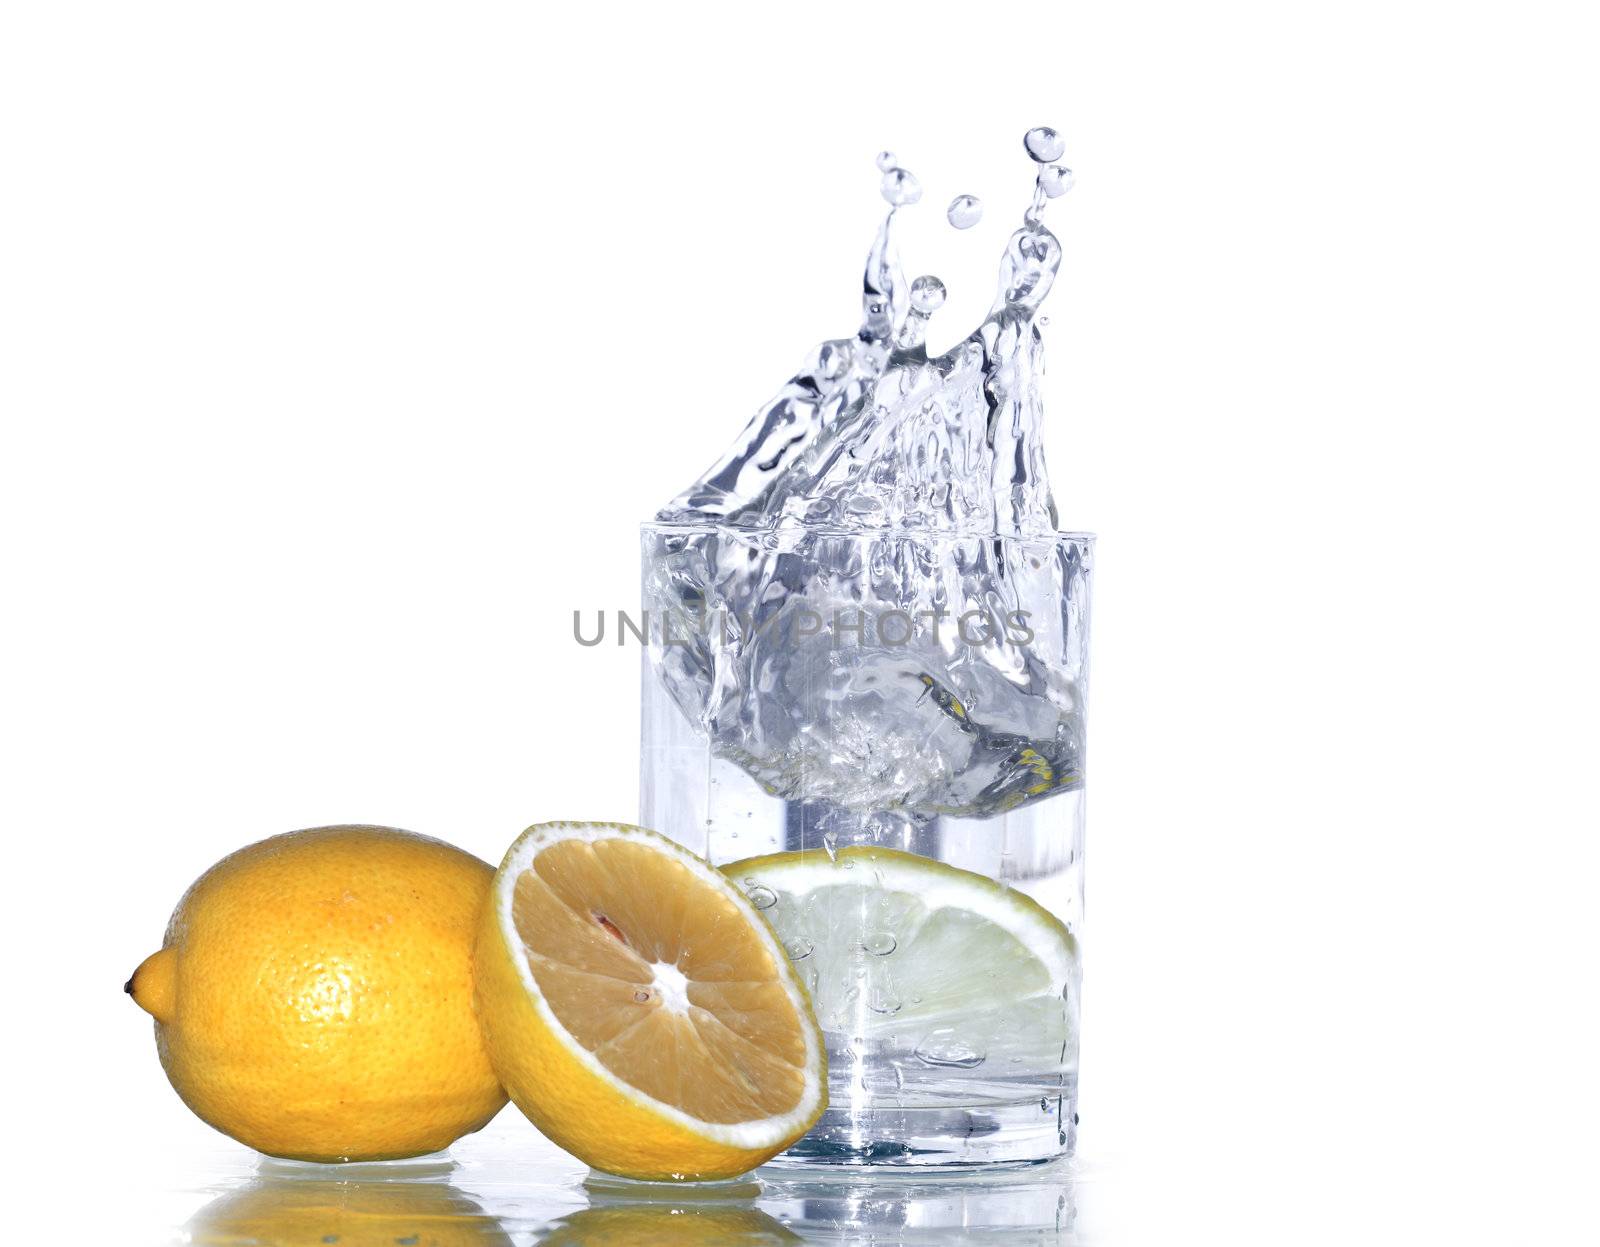 Lemon near glass of splashing water isolated on white background with clipping path